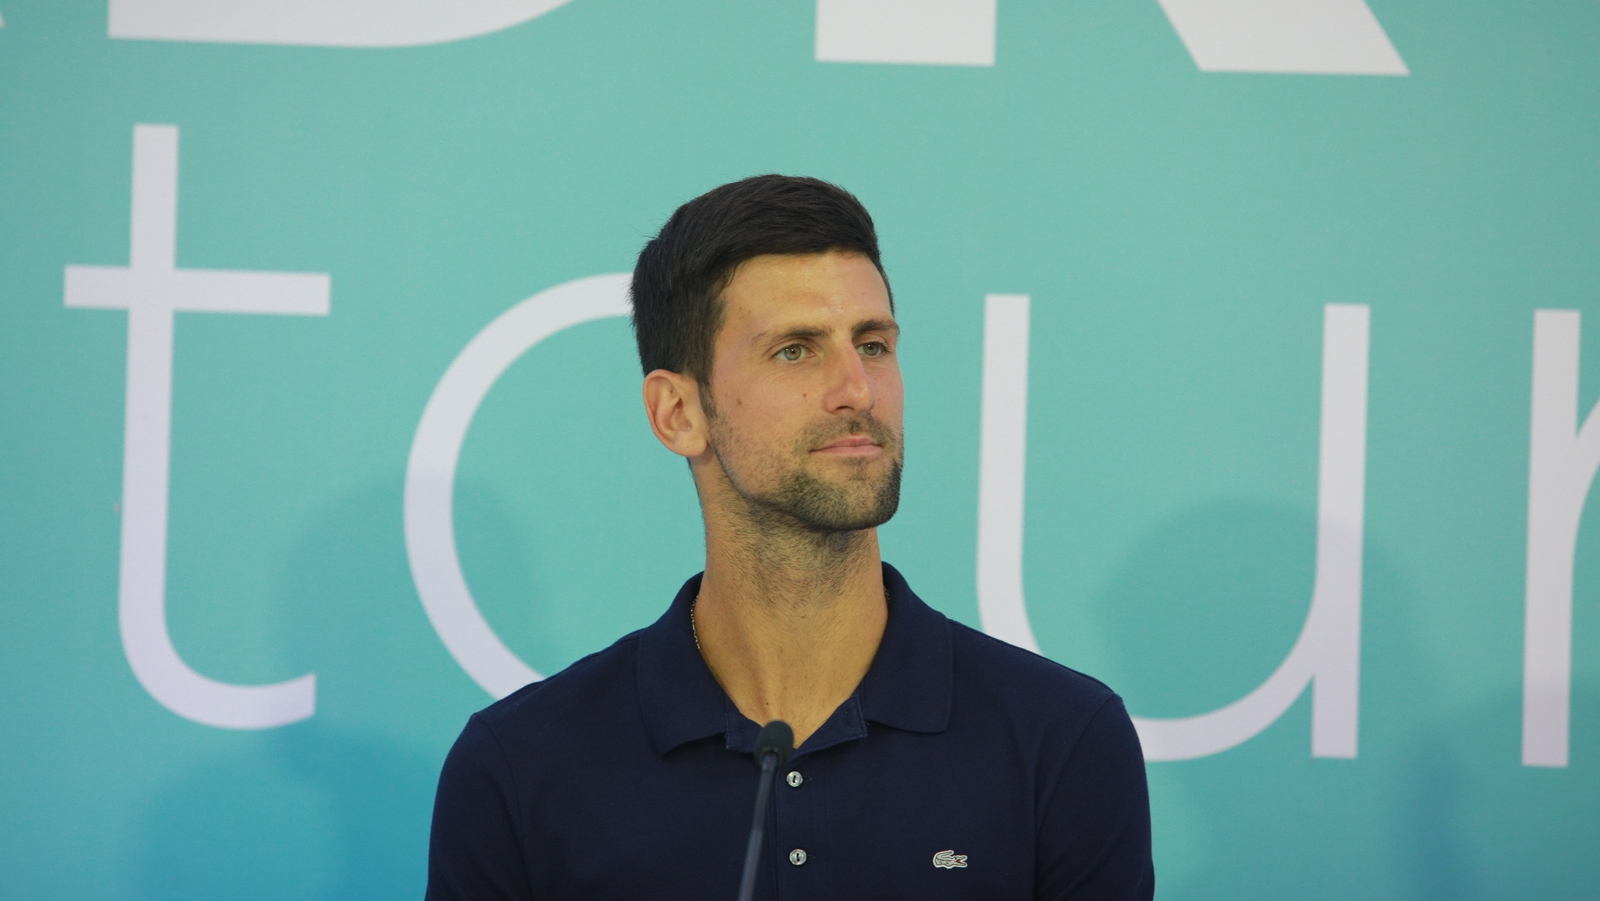 Djokovic apologises after tournament leads to Covid19